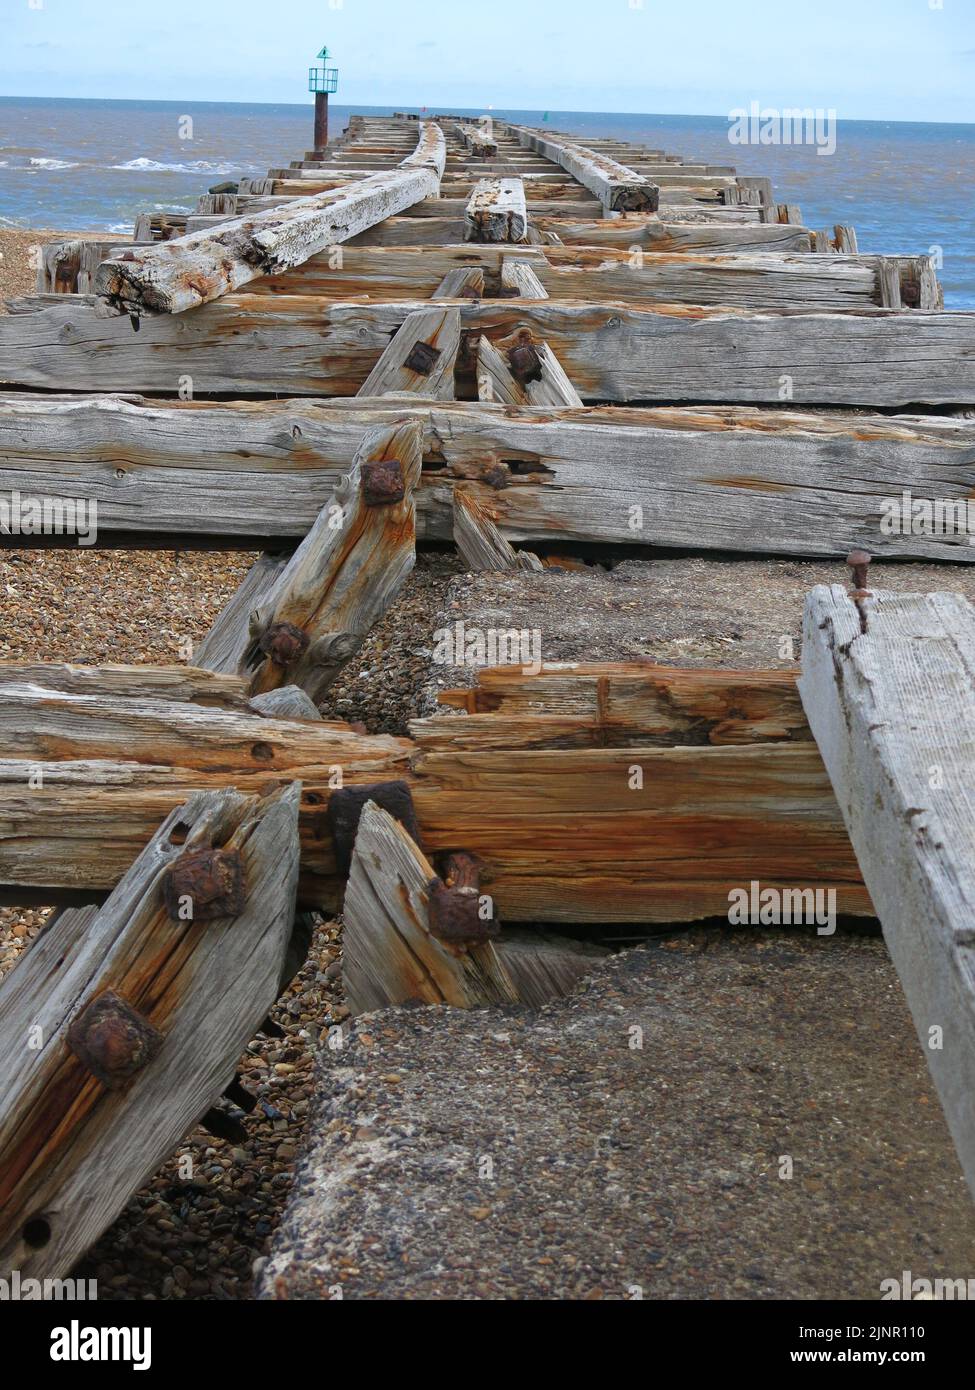 Used to transport sea mines to defend Harwich Harbour, the old wooden planks are all that's left of the railway jetty at Landguard Point, Felixstowe. Stock Photo